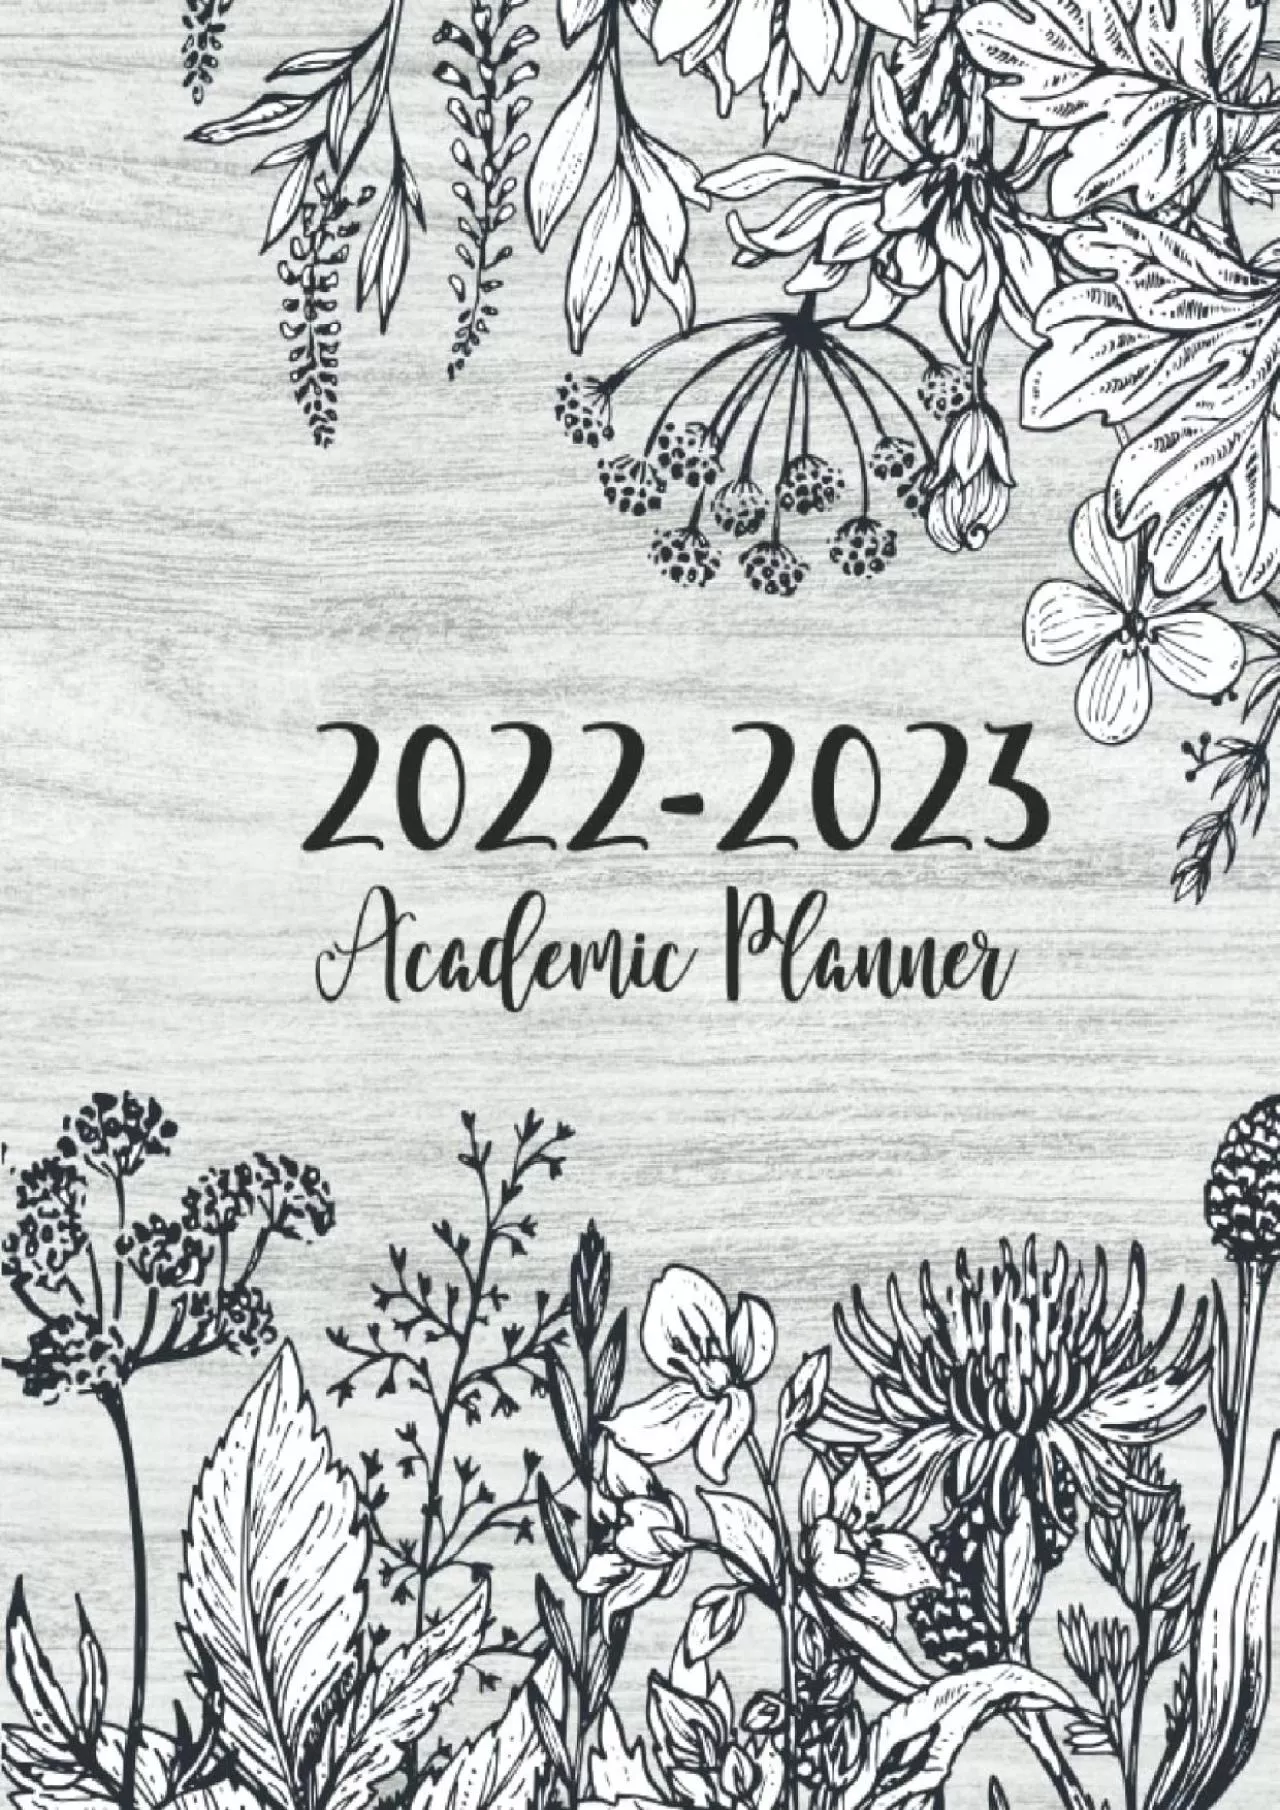 [READ] 2022-2023 Academic Planner: Hand Drawn Wildflowers Cover | July 2022 - June 2023